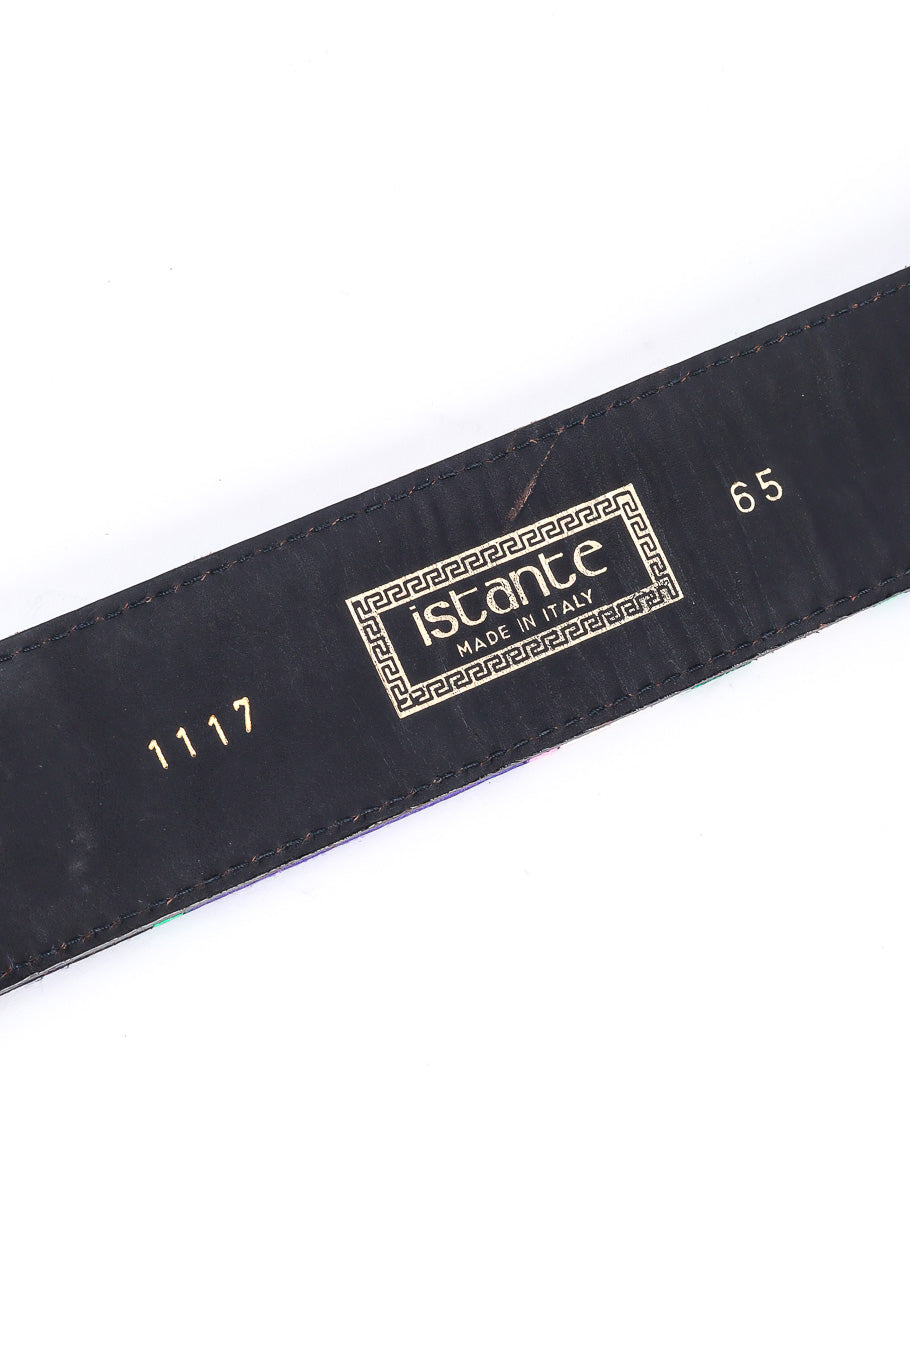 Canvas coated leather belt by Istante label @recessla